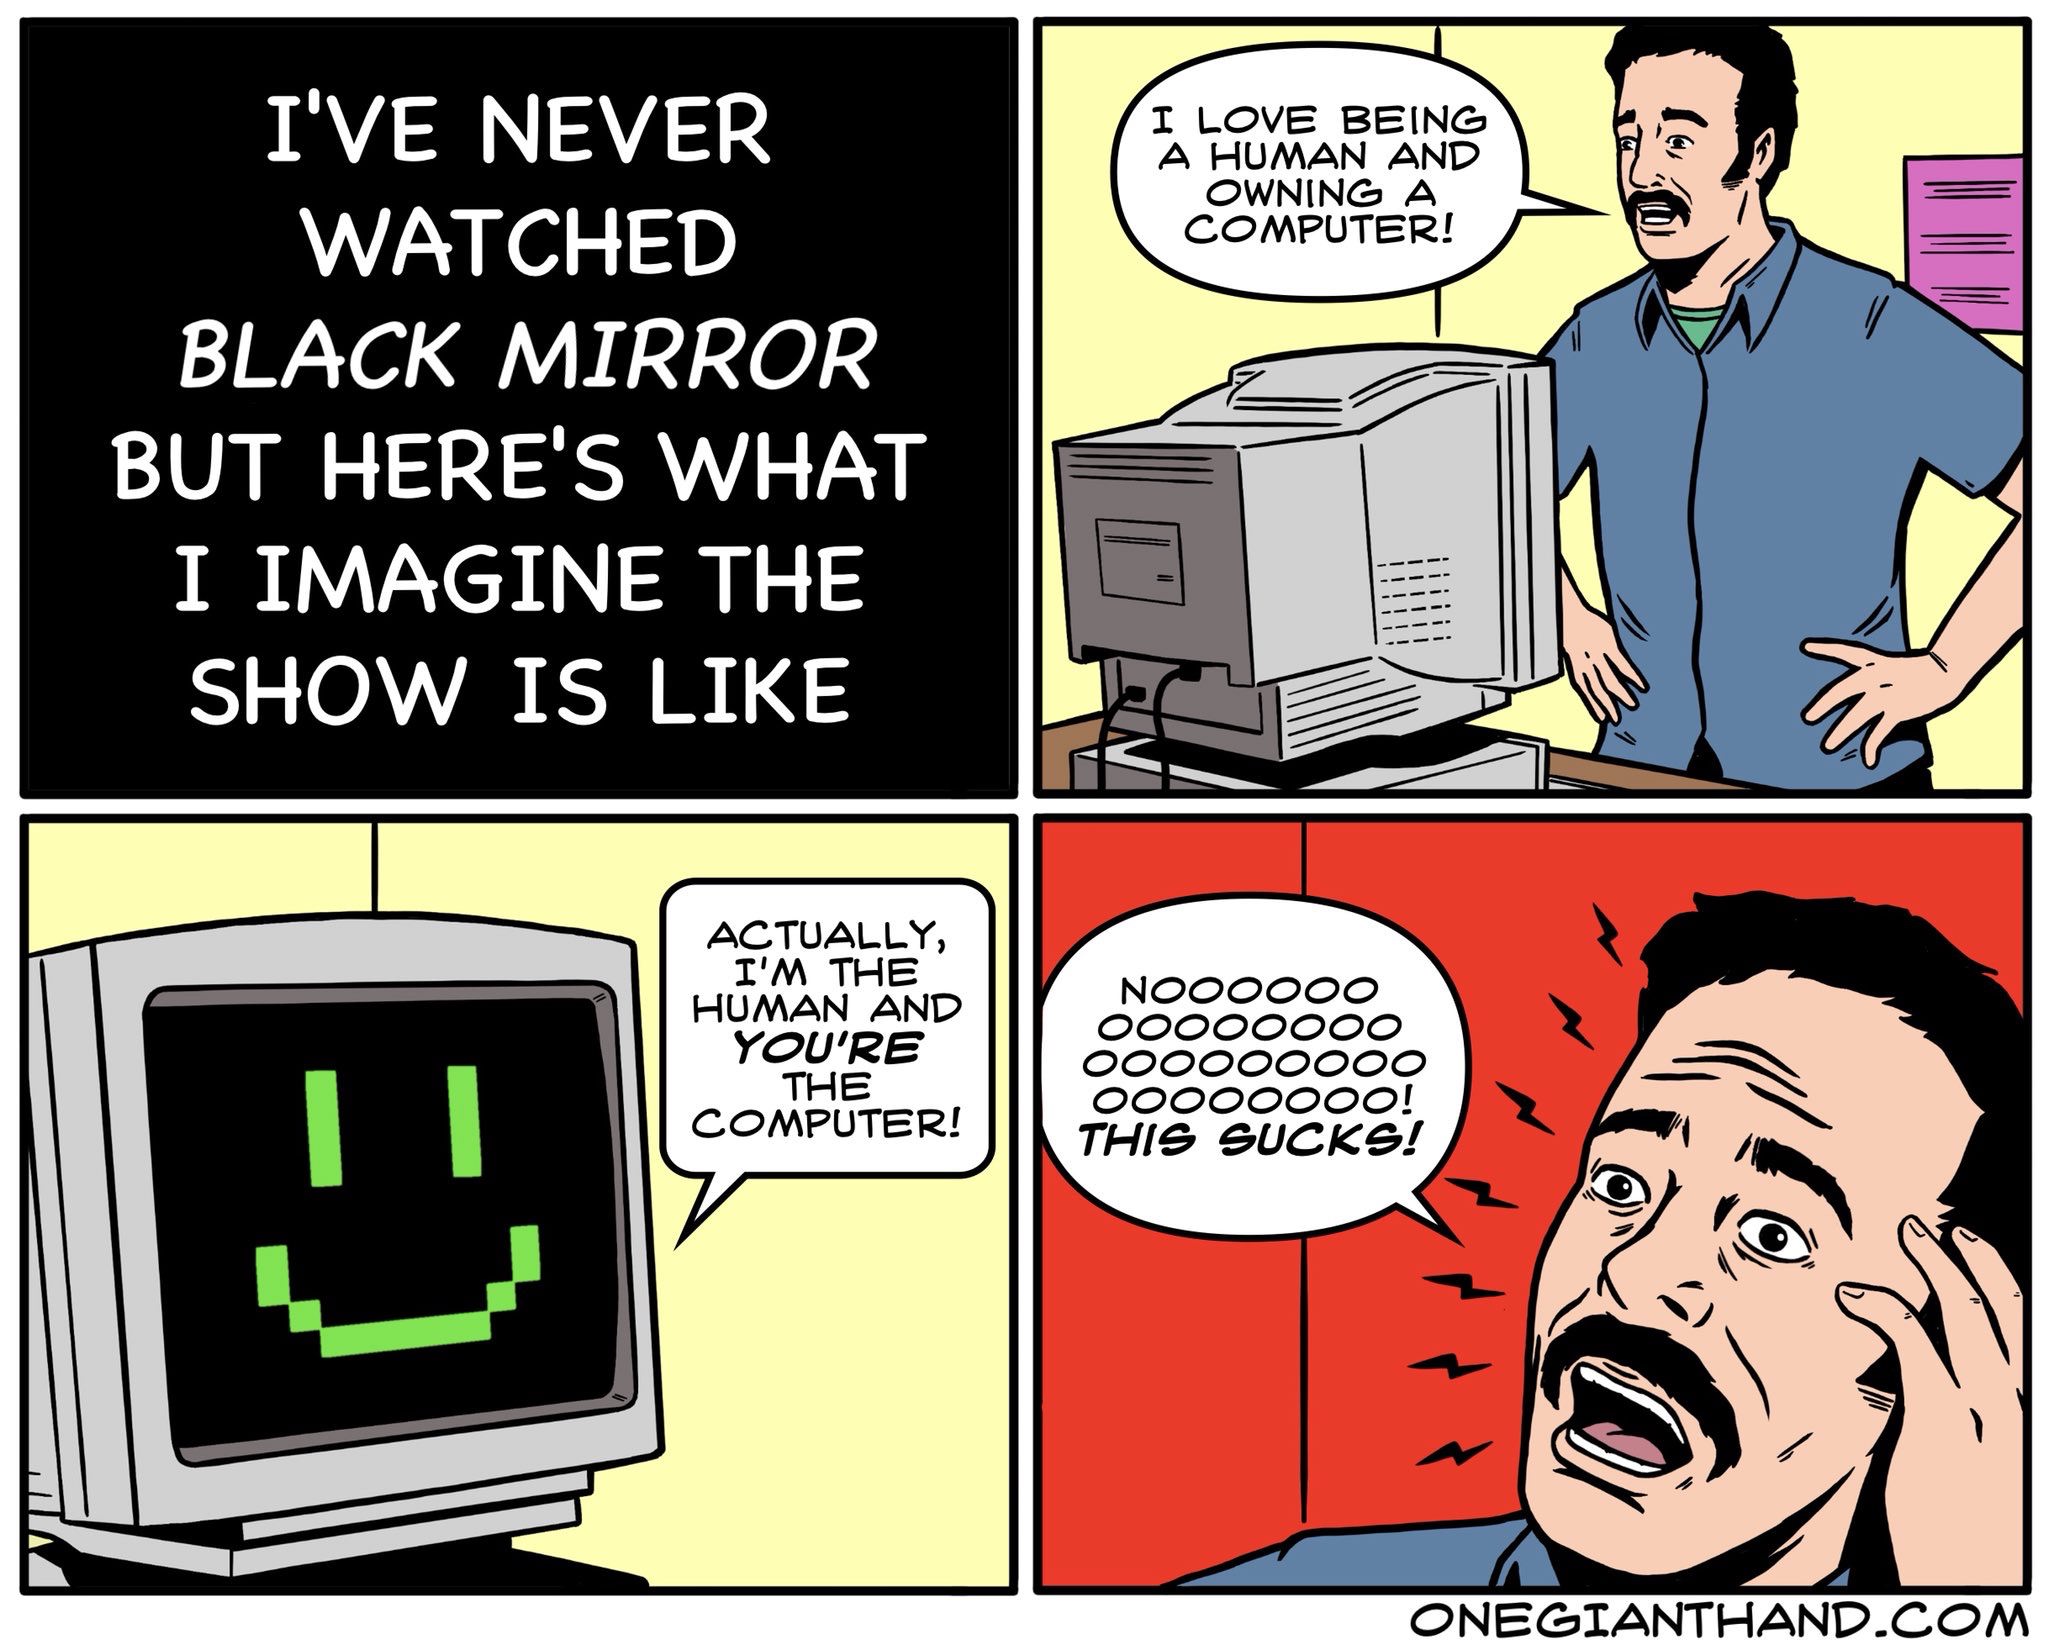 black mirror meme - I Love Being A Human And Owning A. Computer! I'Ve Never Watched Black Mirror But Here'S What I Imagine The Show Is Actually, I'M The Human And You'Re The Computer! Noooooo Oooooooo Ooooooooo Oooooooo! This Sucks! Onegianthand.Com